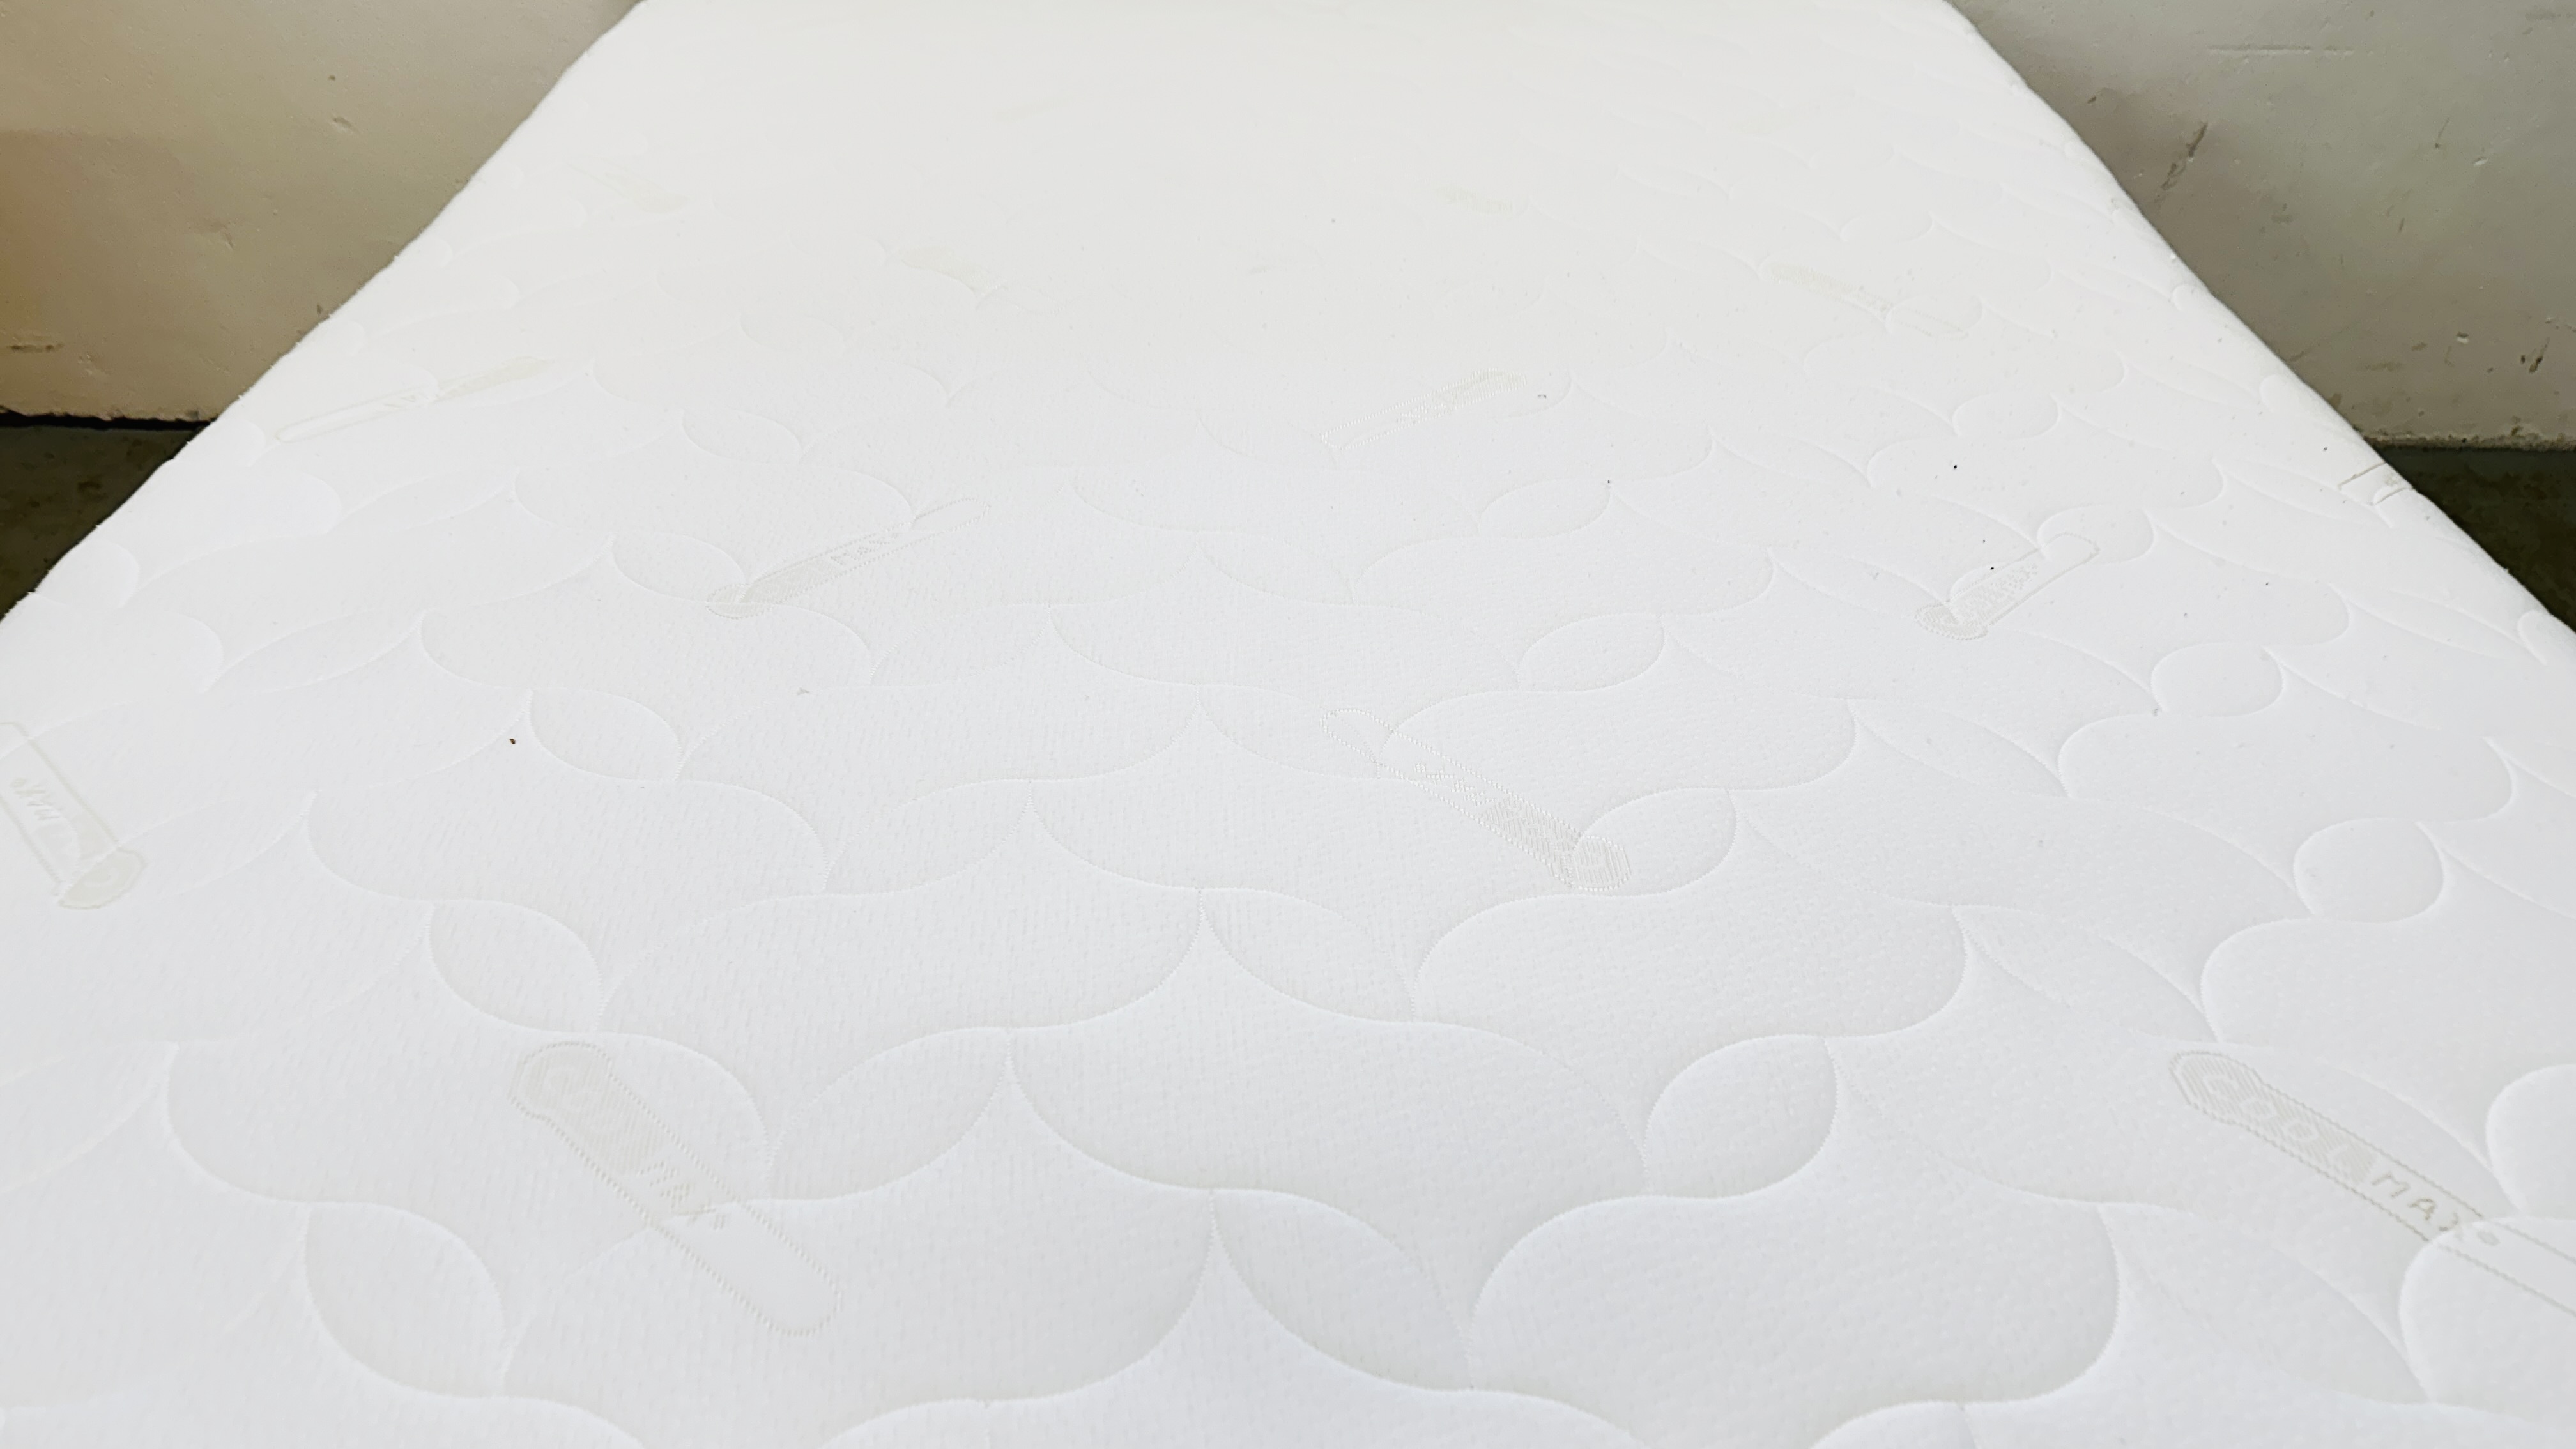 AN ELECTRICALLY ADJUSTABLE DOUBLE BED WITH COOLMAX MATTRESS AND OATMEAL UPHOLSTERED STEWART JONES - Image 3 of 16